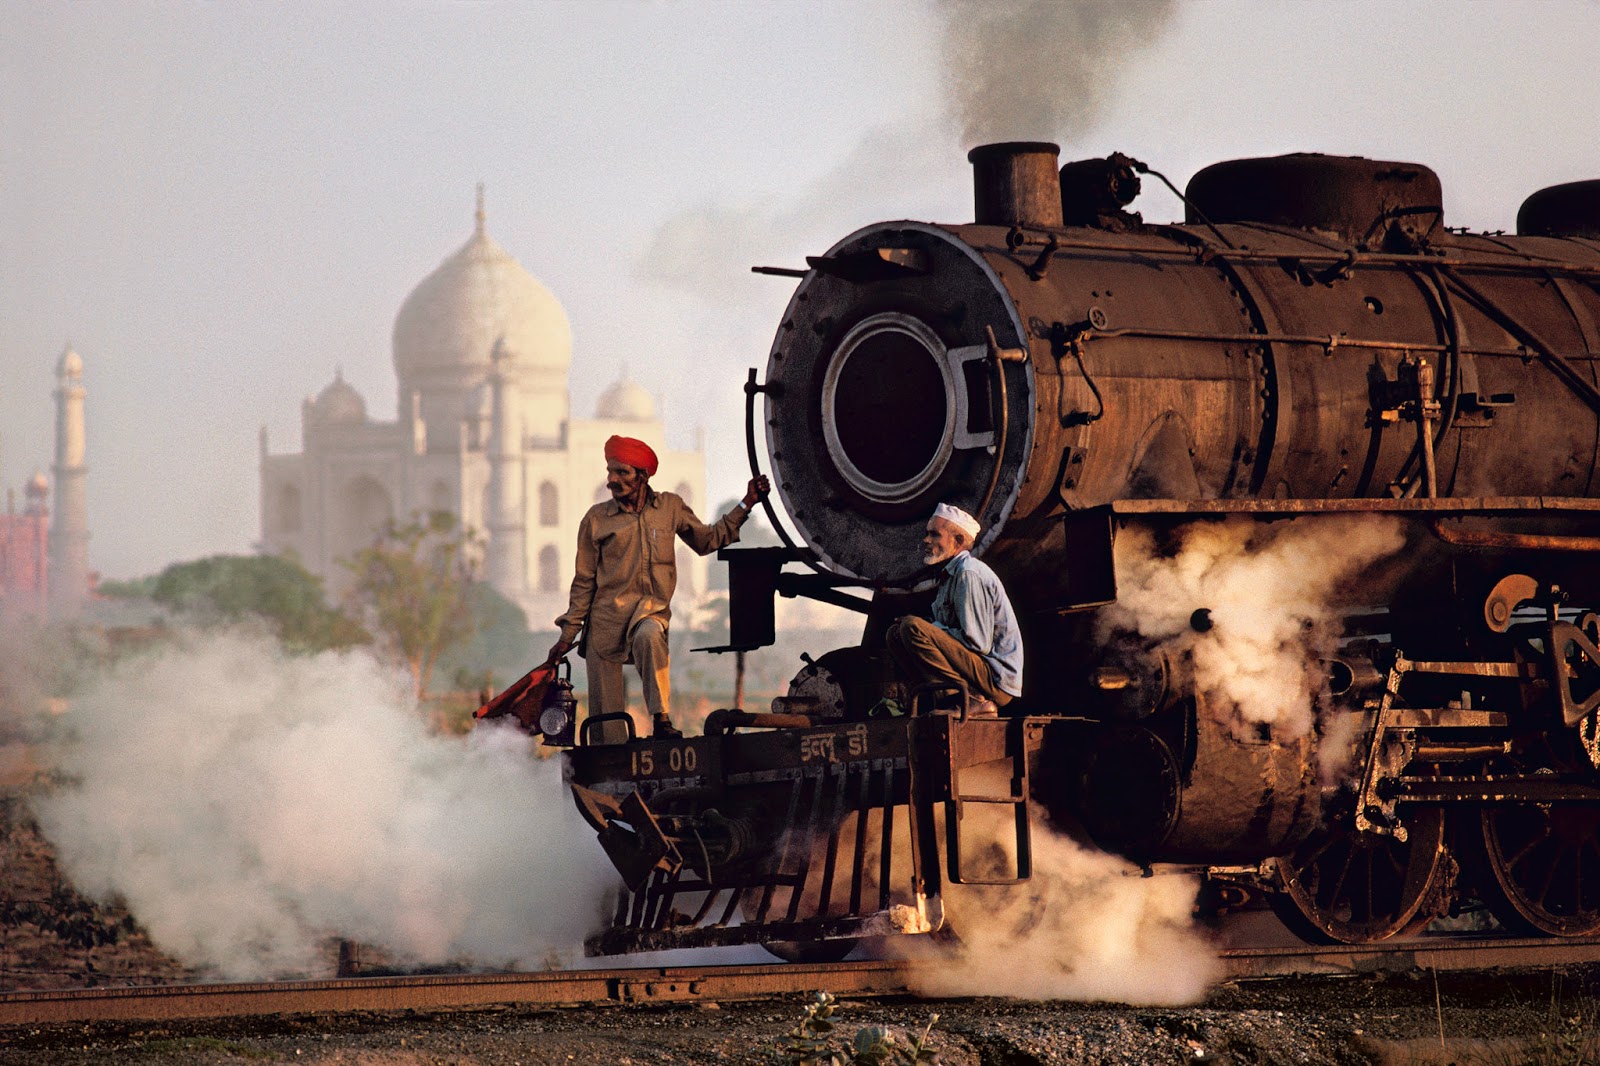 Steve McCurry Merges Art and Photojournalism